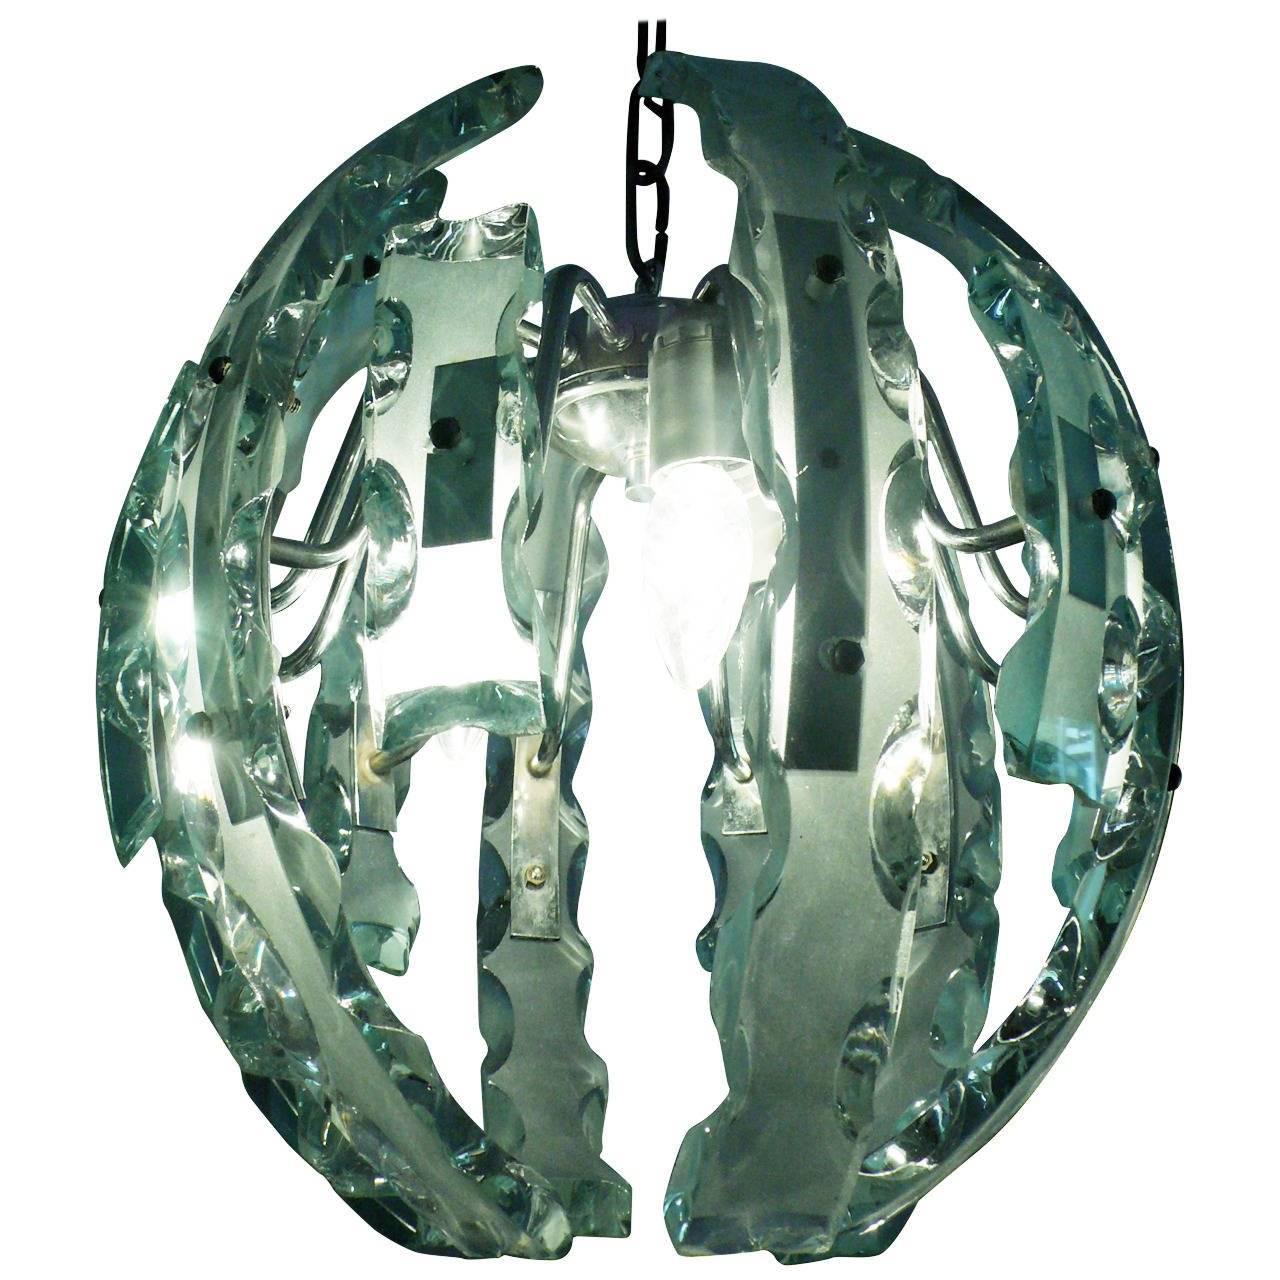 Extraordinary pendant in the shape of a large egg Fontana Arte style. Twelve carved glass Verde Nilo color.